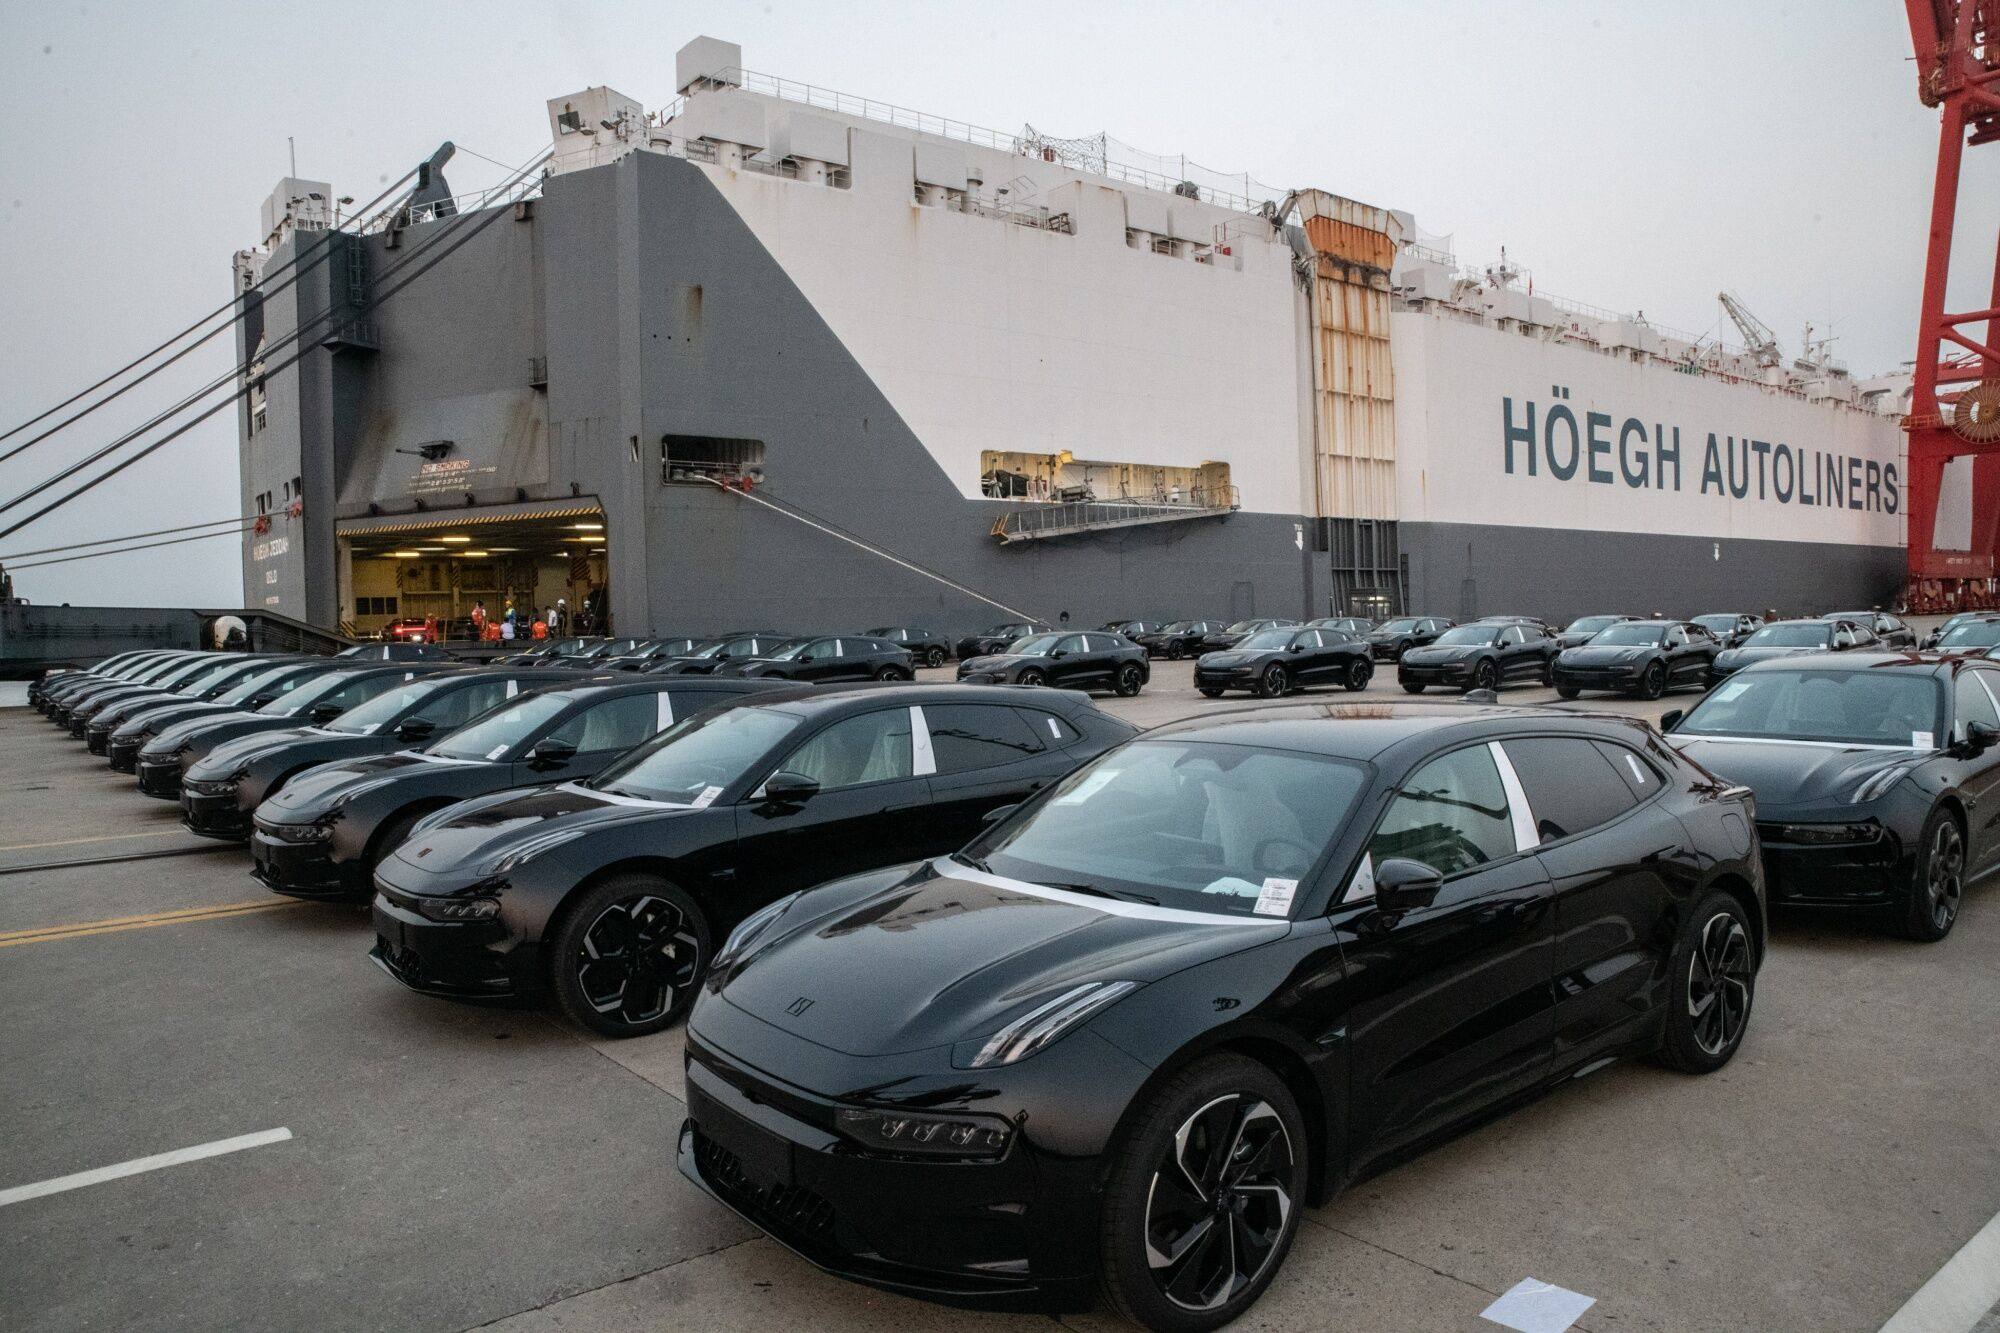 Geely Automobile Holdings Ltd.’s Zeekr electric vehicles bound for shipment to Europe at the Port of Taicang in Taicang, Jiangsu Province, China. Photo: Bloomberg